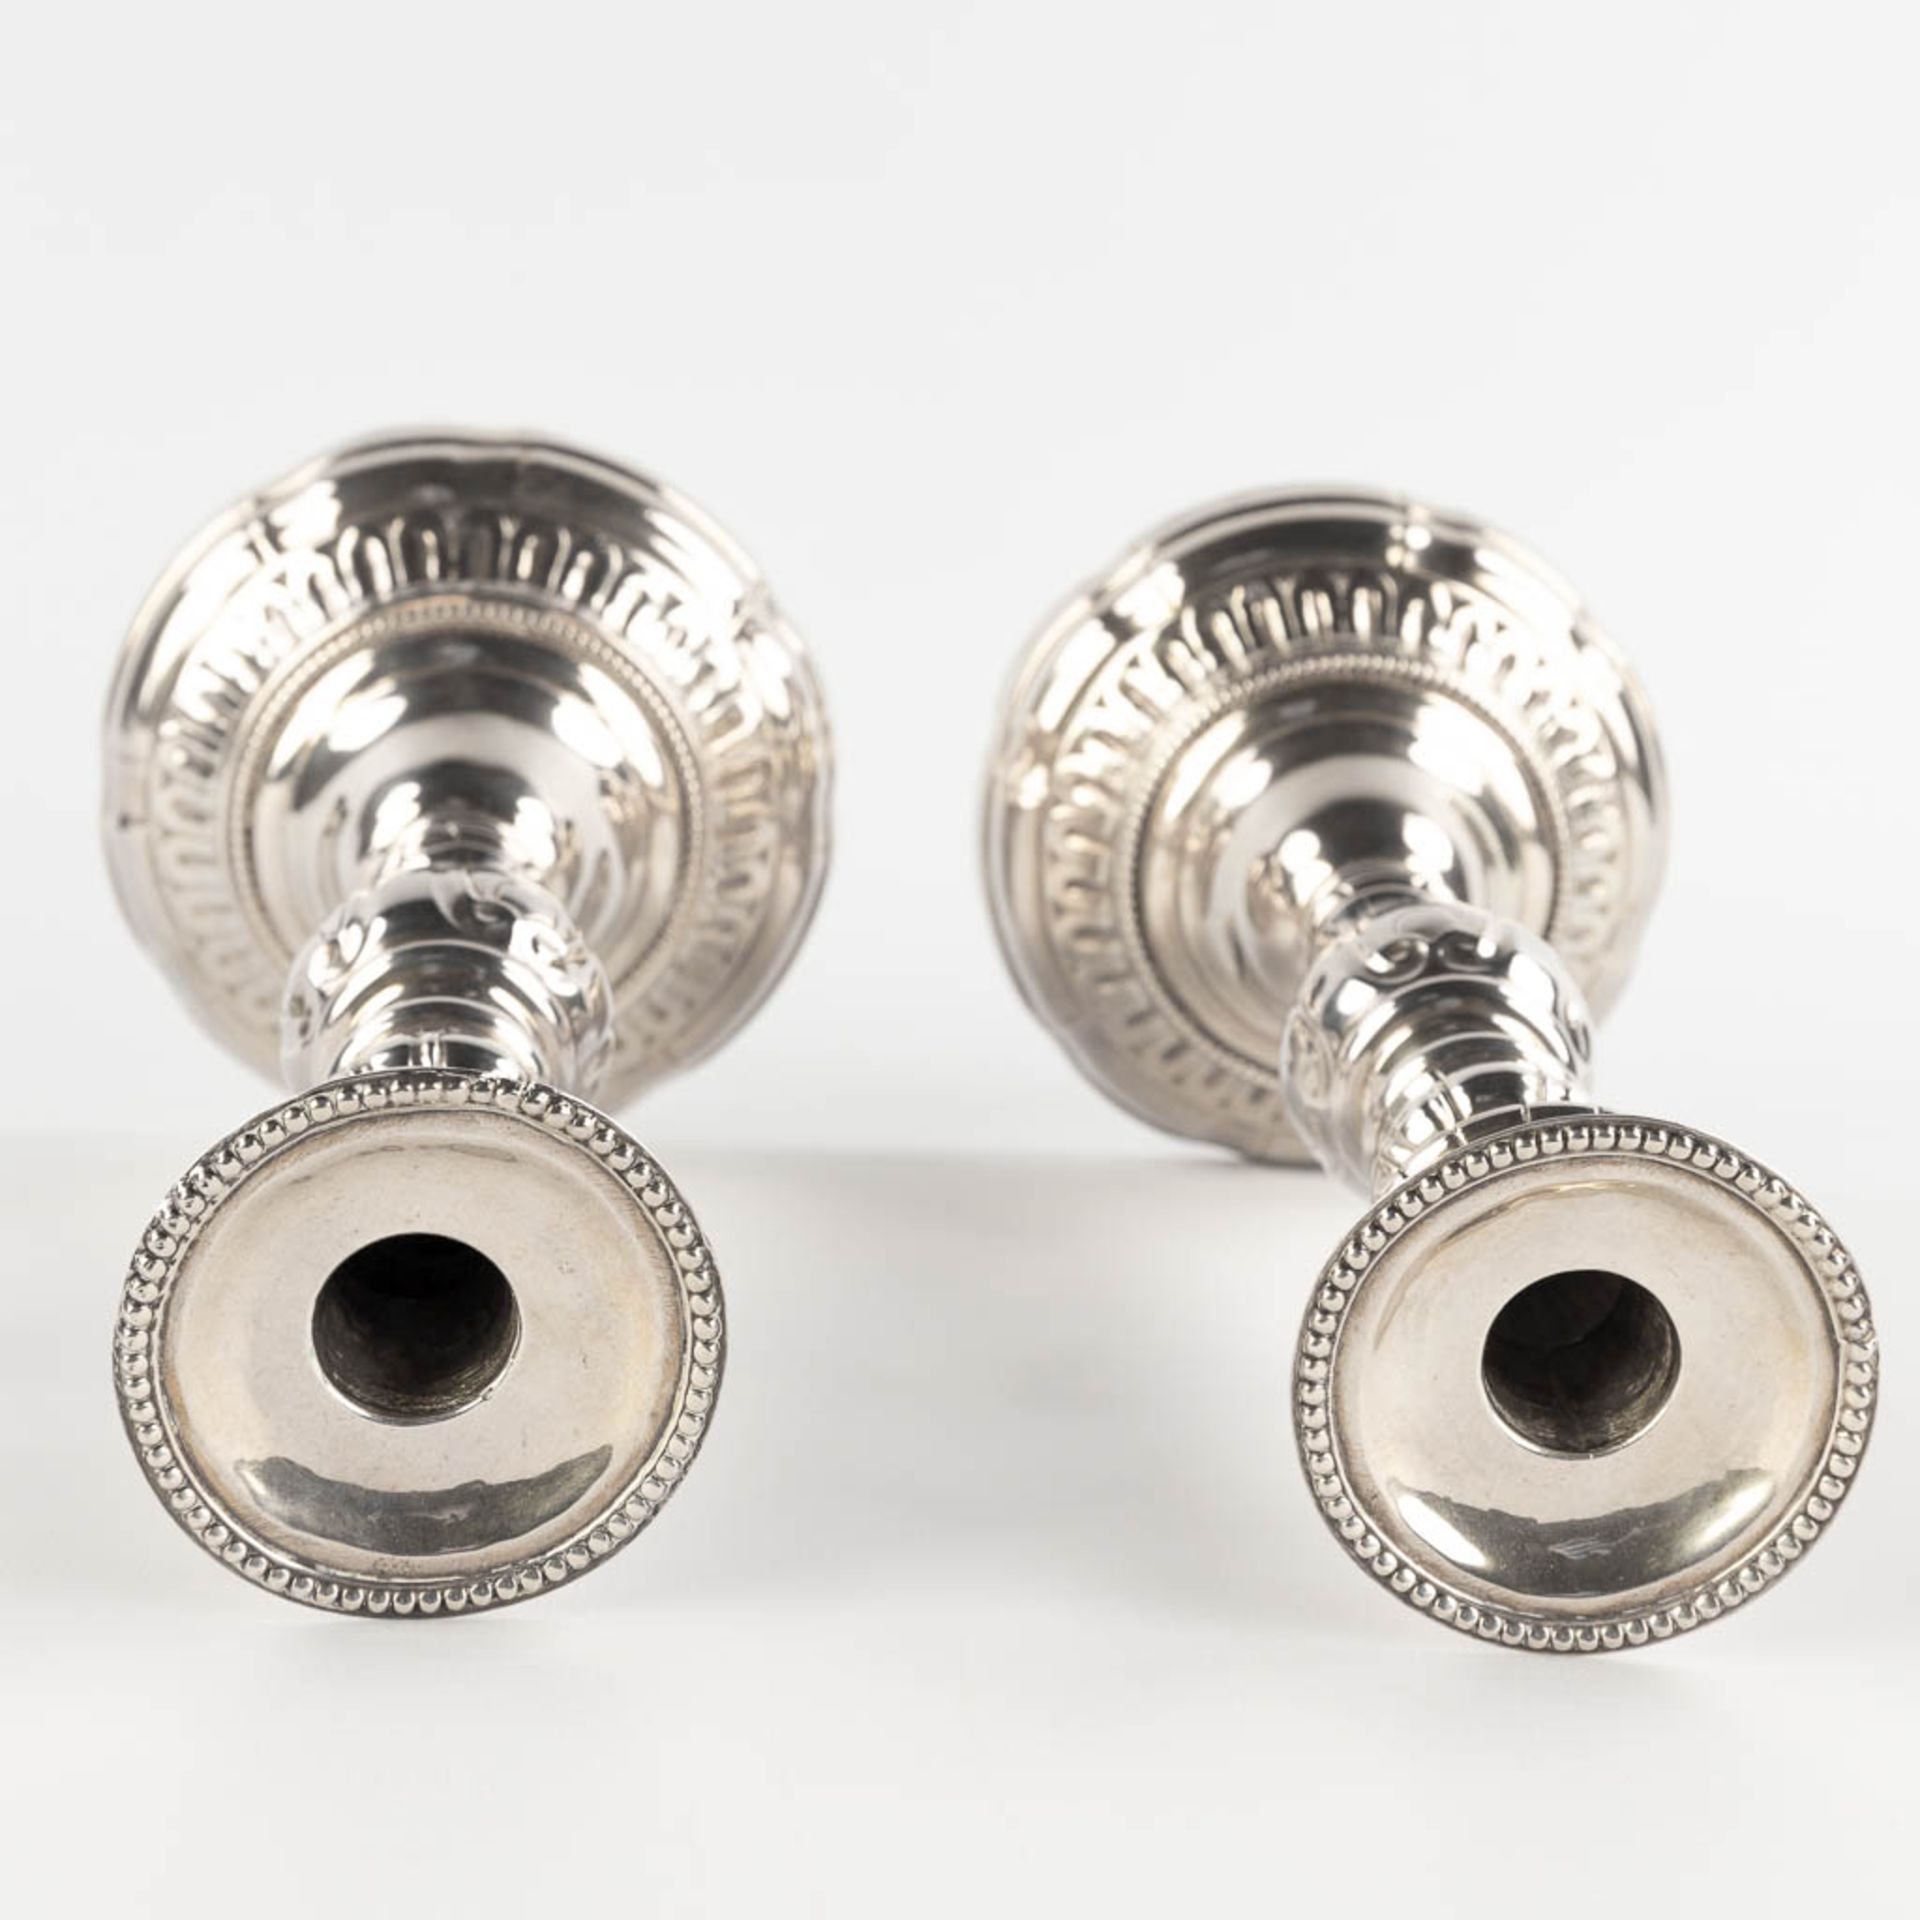 A pair of candlesticks, silver, signed A.De Keghel, Roos. A925. 831g. (H:26 x D:13,5 cm) - Image 7 of 9